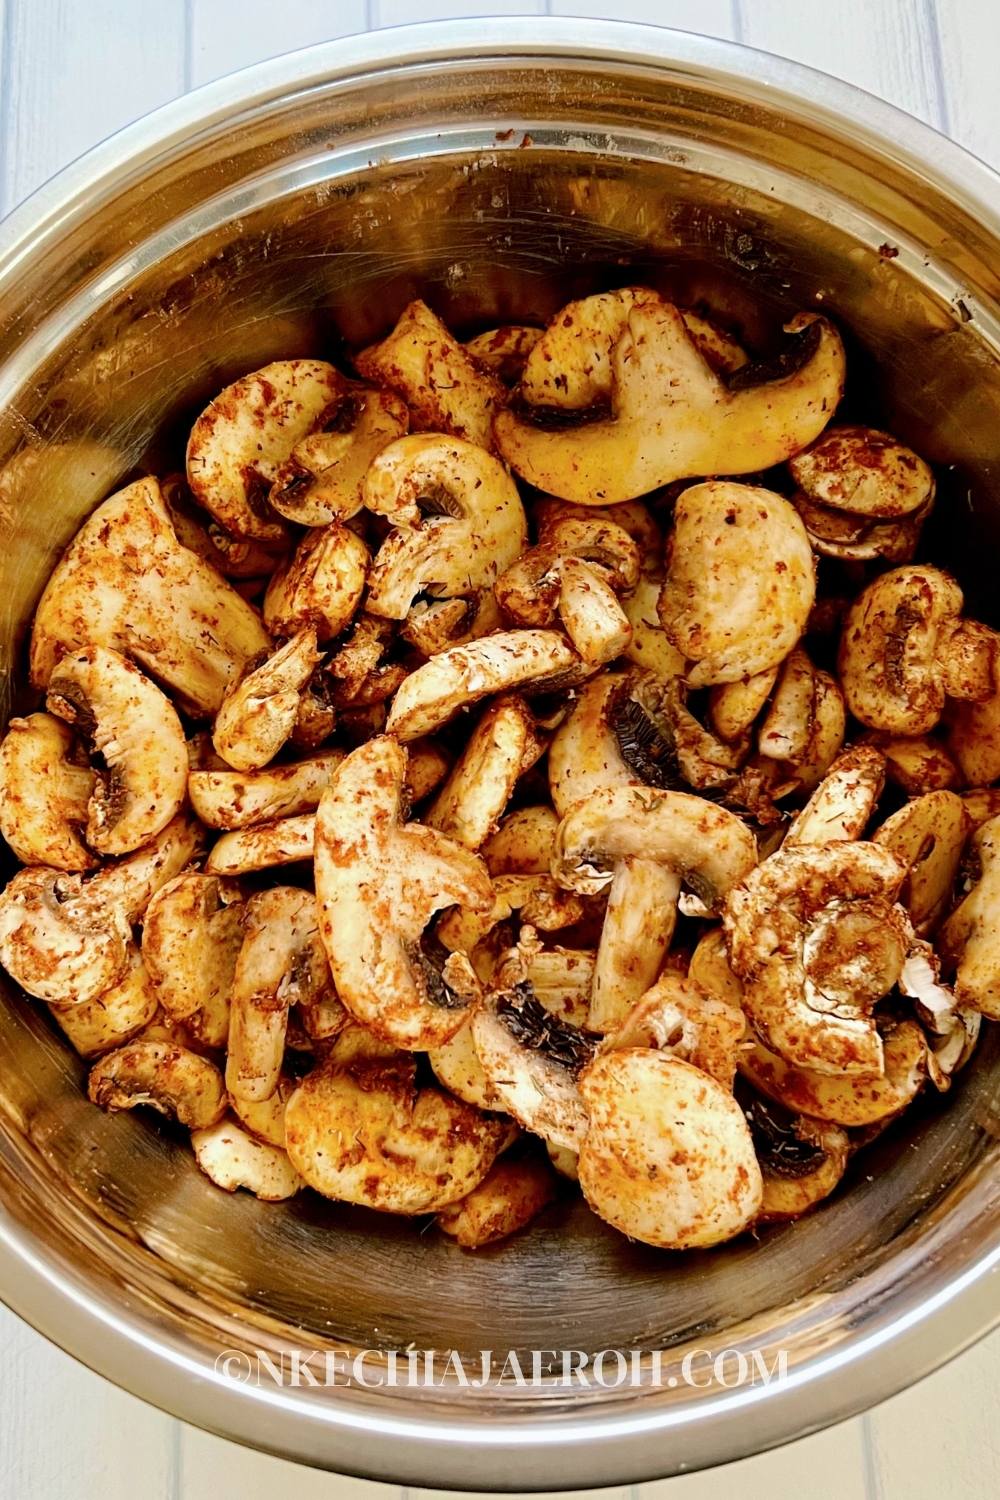 A simple recipe of air fryer mushrooms requires sliced mushrooms, paprika, olive oil, onion powder, garlic powder, dry thyme, salt, and pepper! Making mushrooms in your air fryer is the easiest way to make mushrooms. It takes only a few minutes, resulting in the best tasting mushroom ever! You can add sliced air-fried mushrooms to salads and bowls or use them as appetizers or snacks. This easy salt and pepper air fryer mushroom recipe with paprika is vegan and can replace meat/fish!